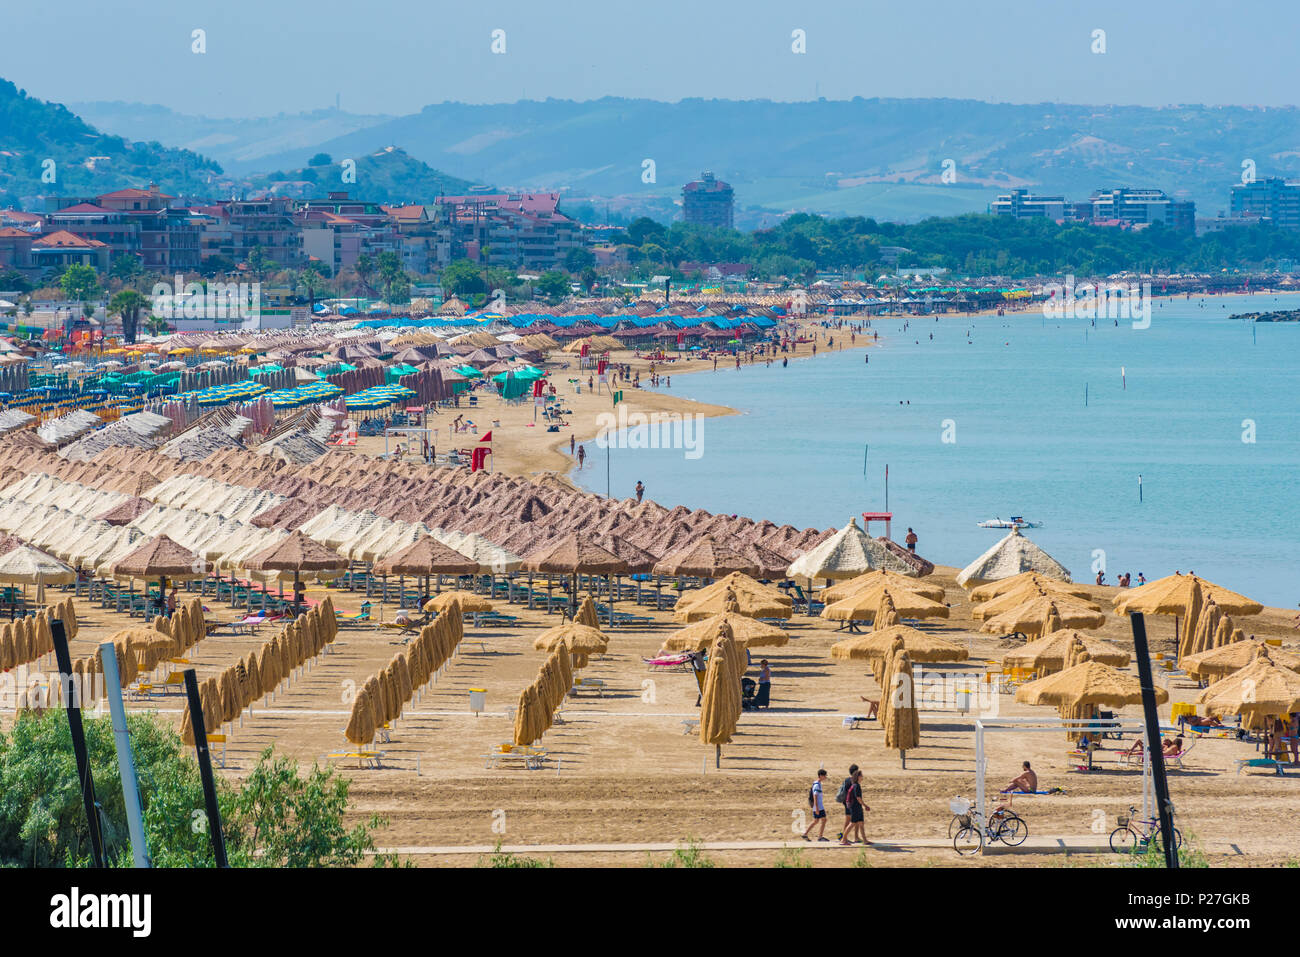 Pescara Italy The Ponte Del Mare Monumental Bridge And The Ferris Wheel On The Beach In The Canal And Port Of Pescara City Abruzzo Region Stock Photo Alamy